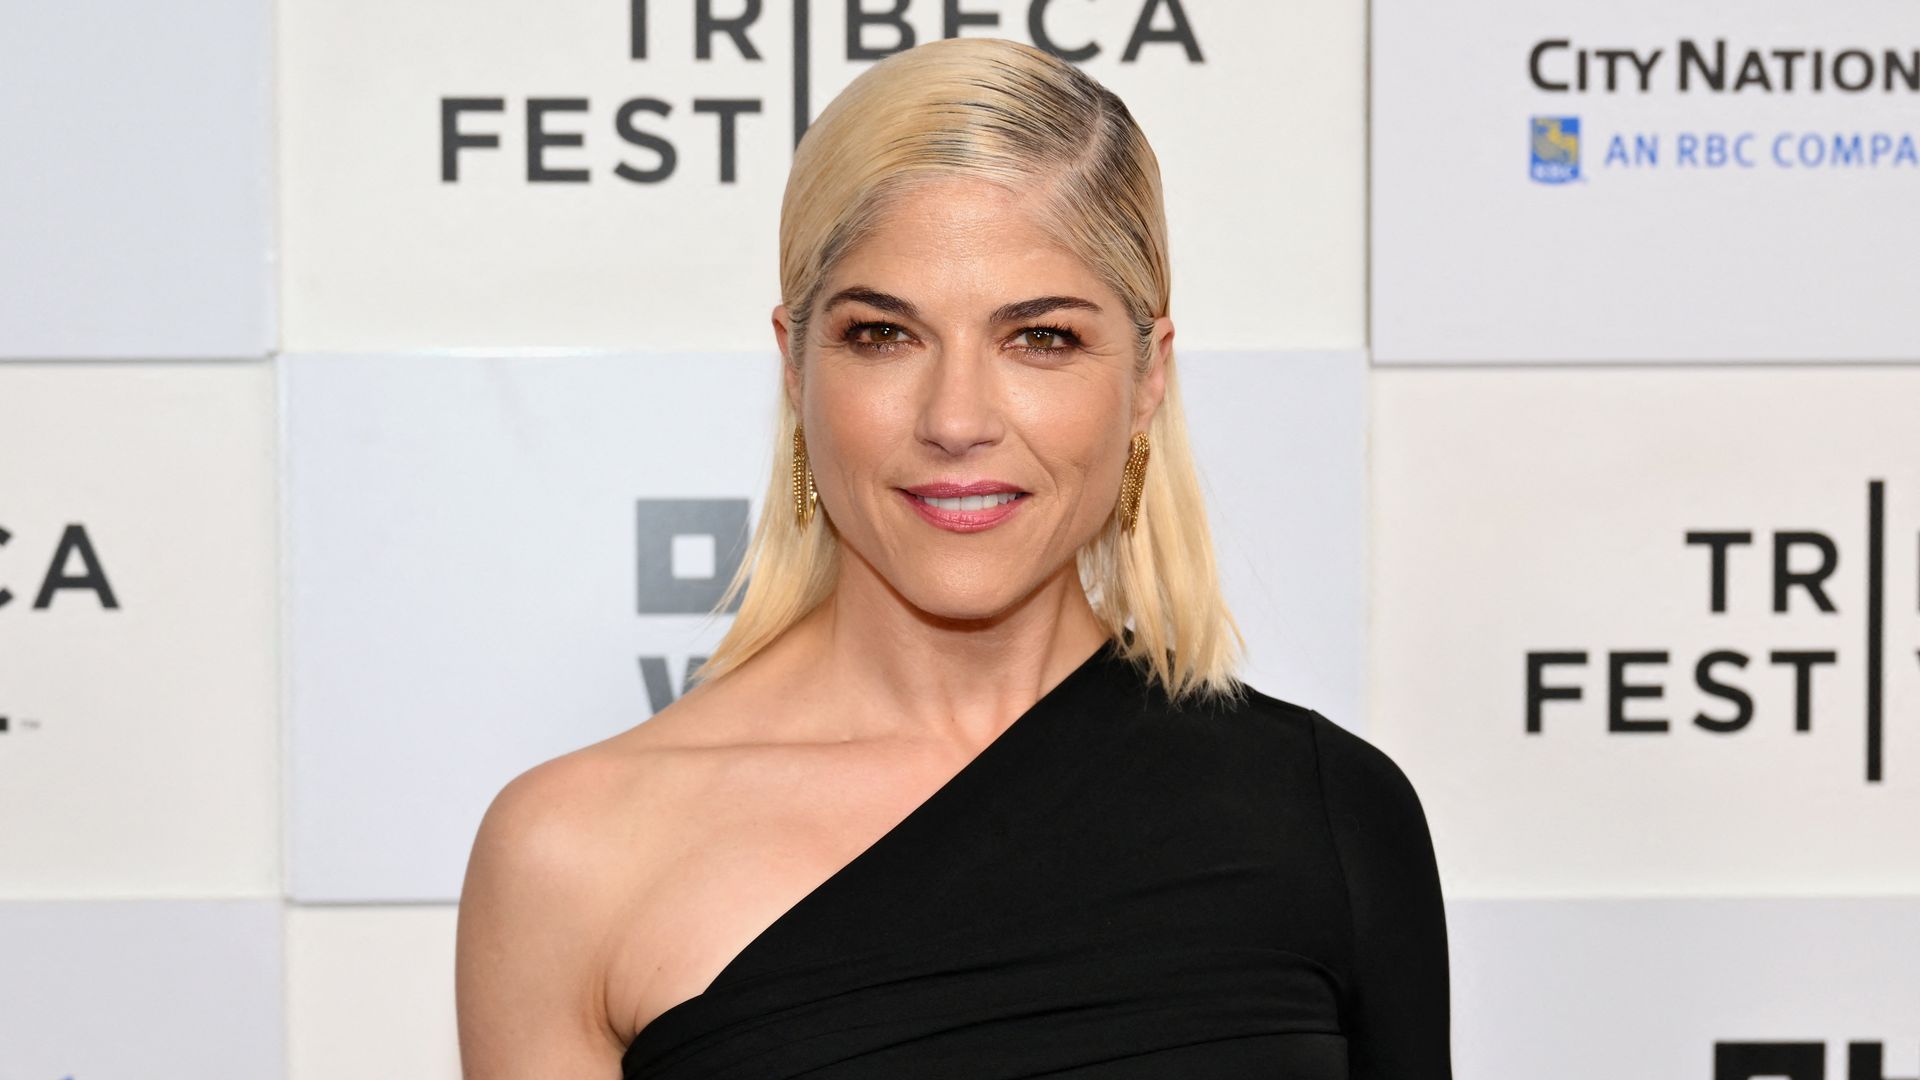 Selma Blair attends the premiere of "Diane Von Furstenberg: Woman In Charge" during the Opening Night of Tribeca Film Festival at BMCC Theater in New York, June 5, 202